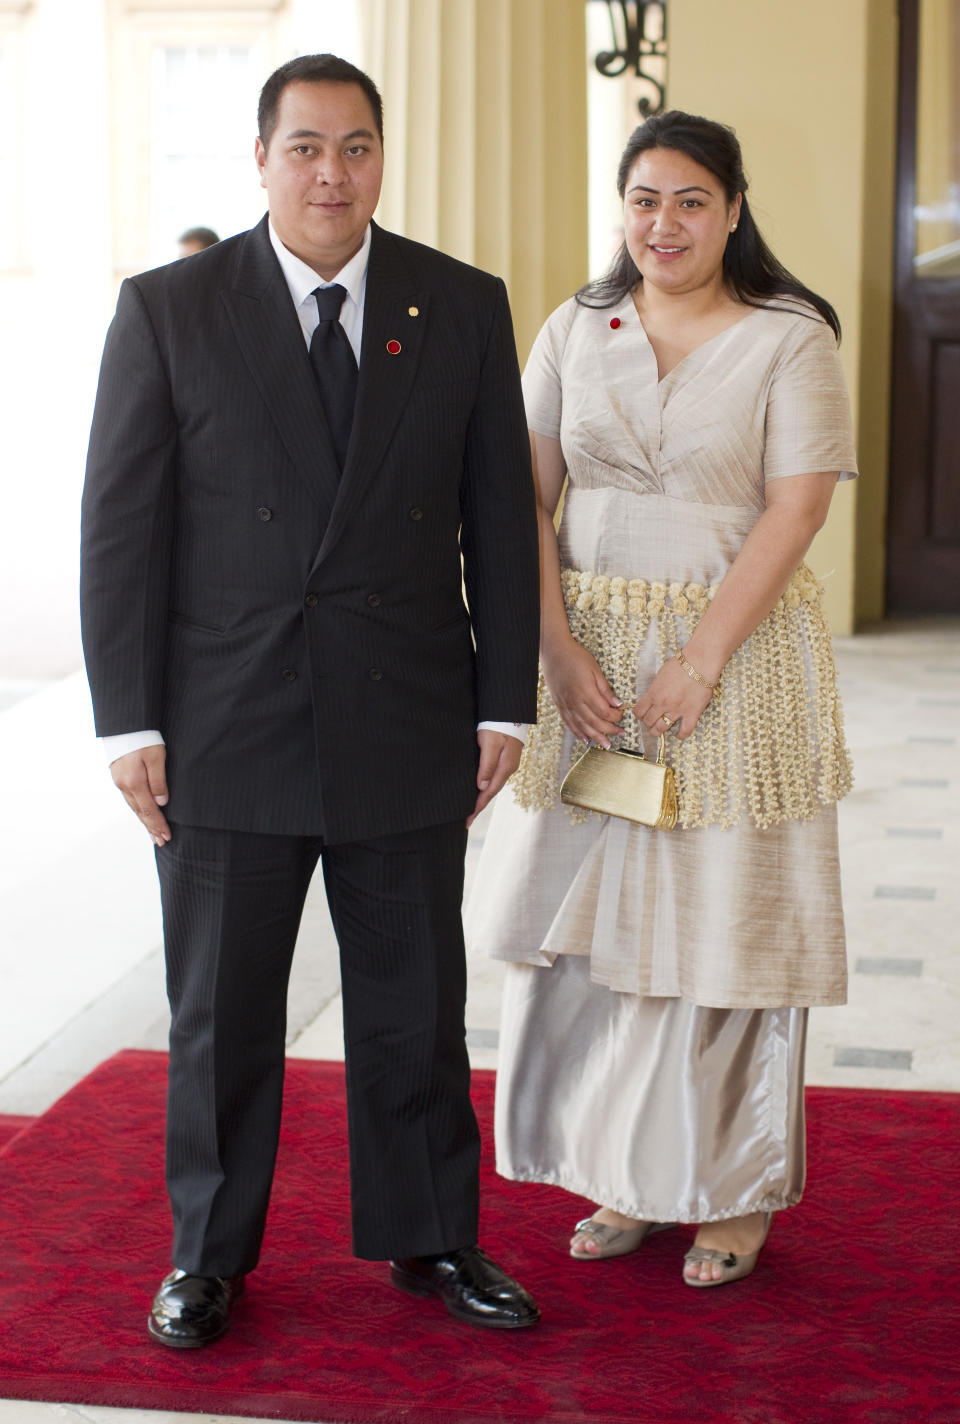 the crown prince standing with a lady